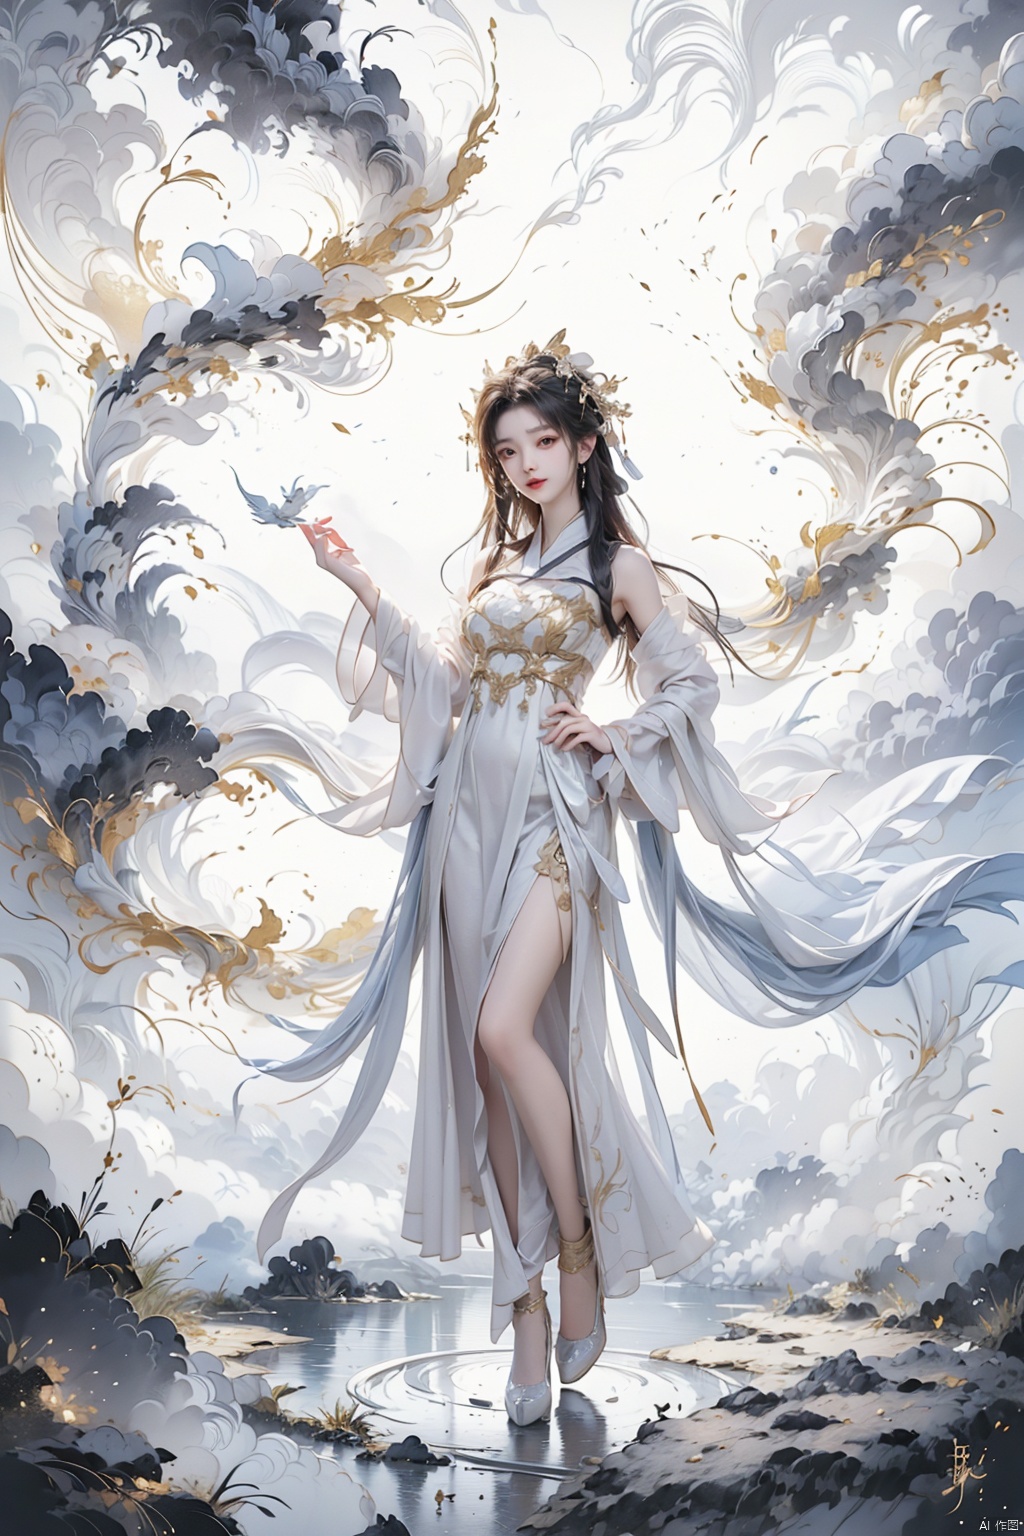  ,full_body,red lips,real skin, Tall figure, with rich details, (((masterpiece))), best quality, Correct scale, ultimate detail, illustrations, ultra high definition, 8k resolution, best image quality, high detail, Blademancer, full_body, one_leg_up,cloud,qzjulingqianjiang,guofeng,swordsman,shidudou,1 girl,Blademancer,jingliu, a water dragon behind, white dress dress, hold a stream of water in hand,water,gonggongshi